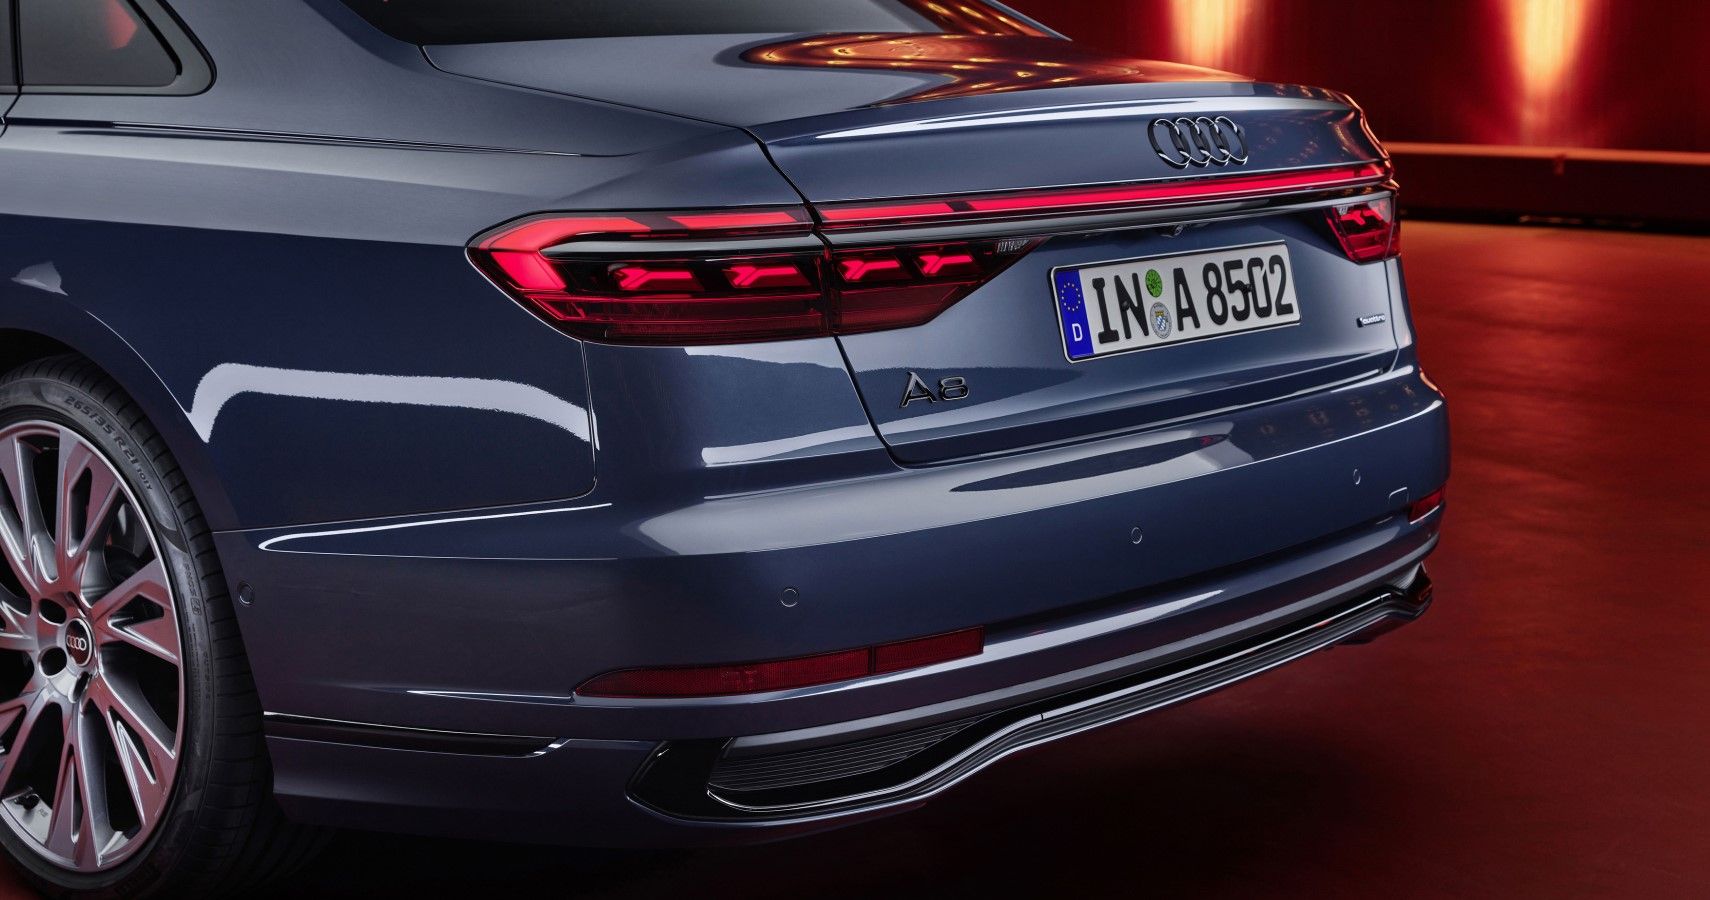 2022 Audi A8 taillamps close-up view